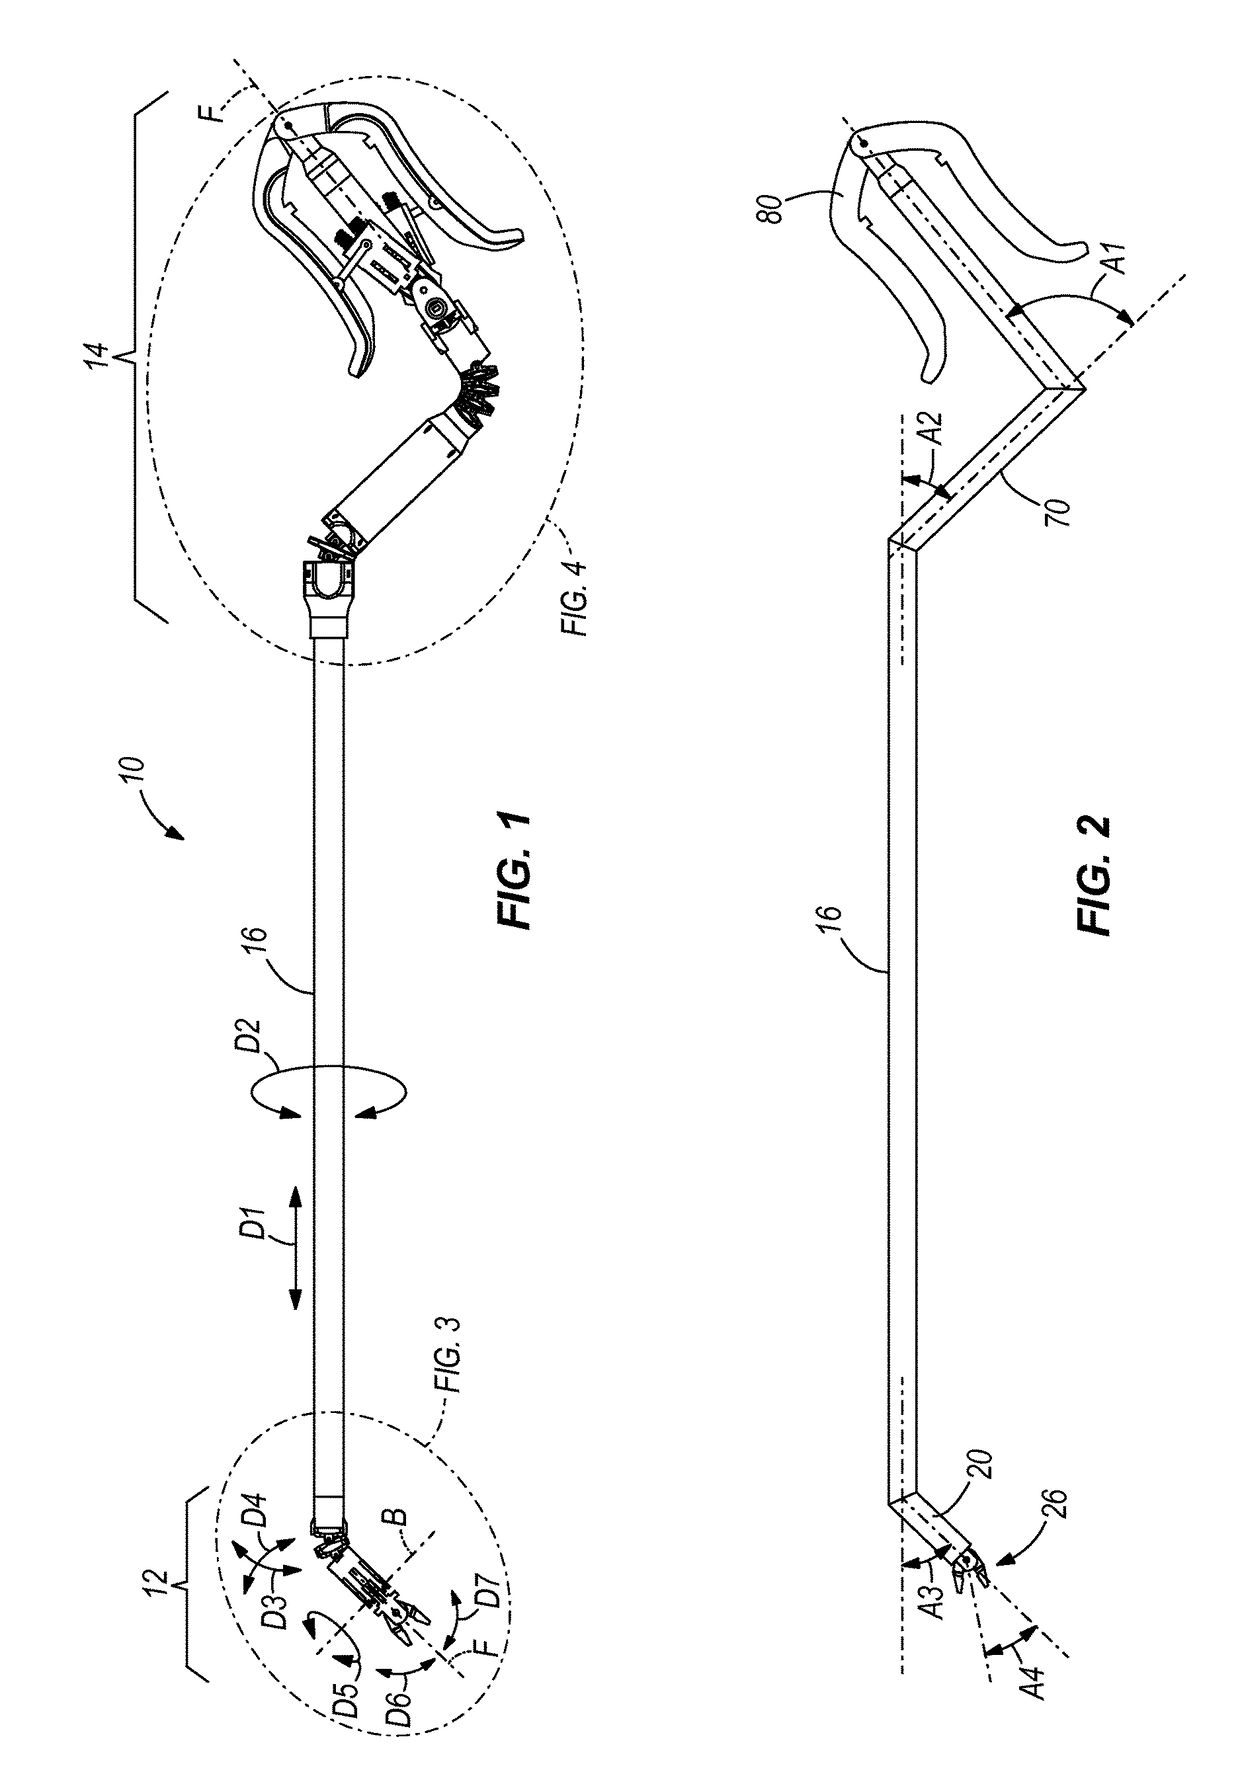 Dexterous surgical manipulator and method of use